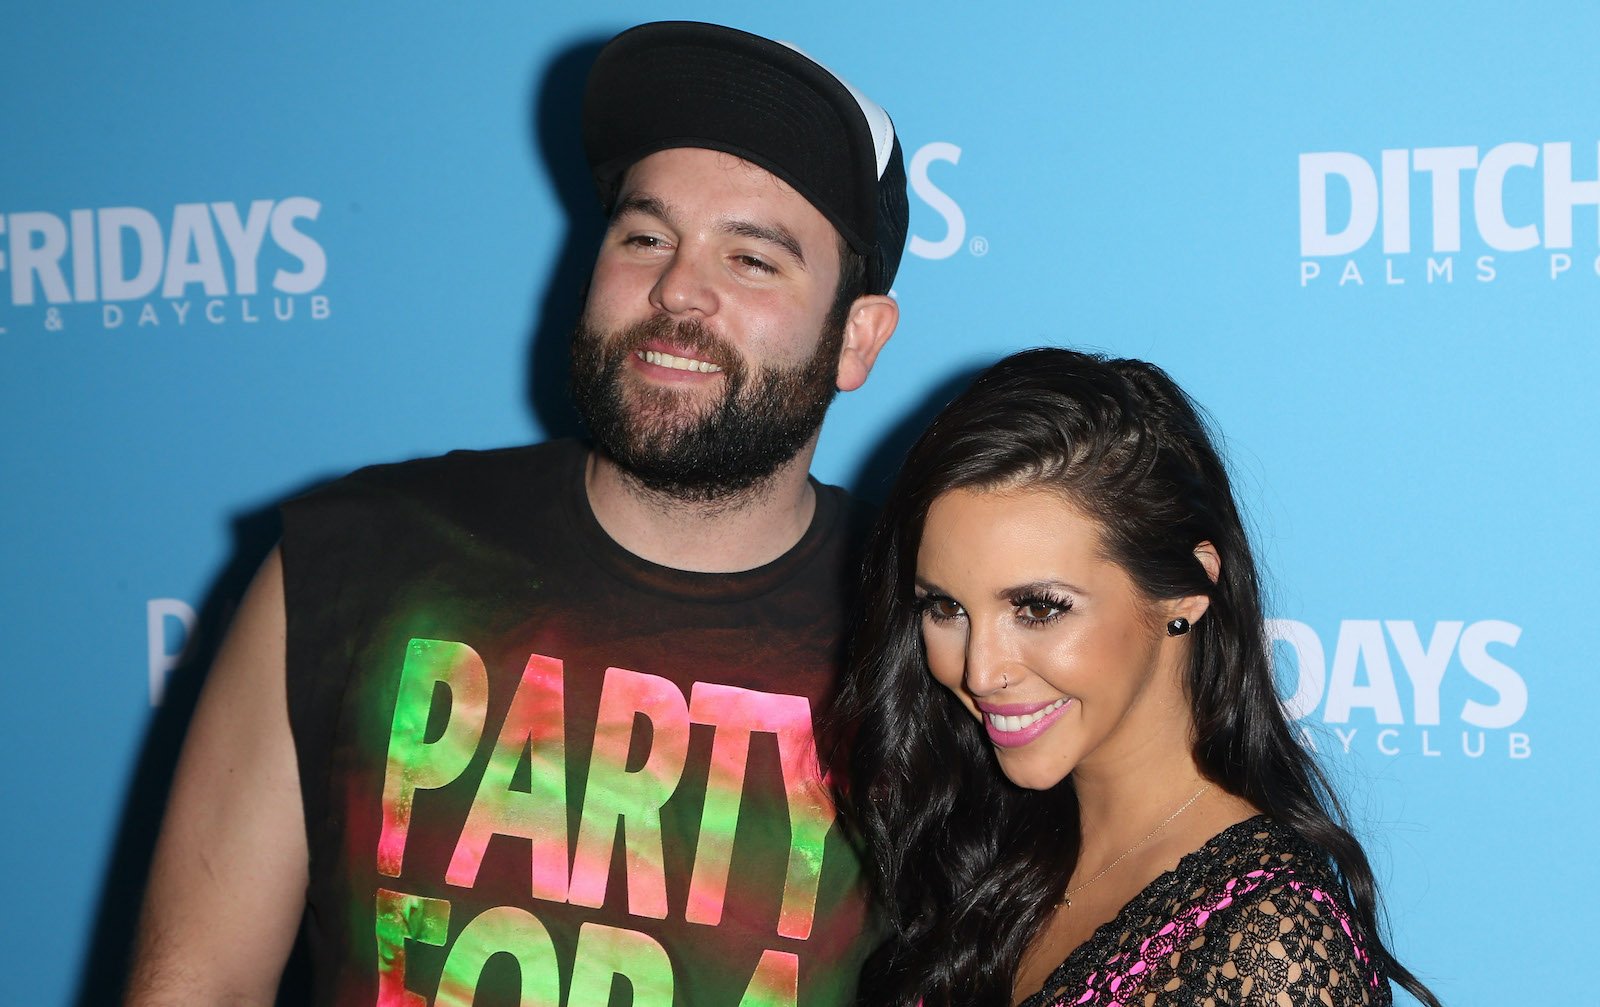 Scheana Shay and Mike Shay from Vanderpump Rules pose for photos at her birthday party in 2015. 